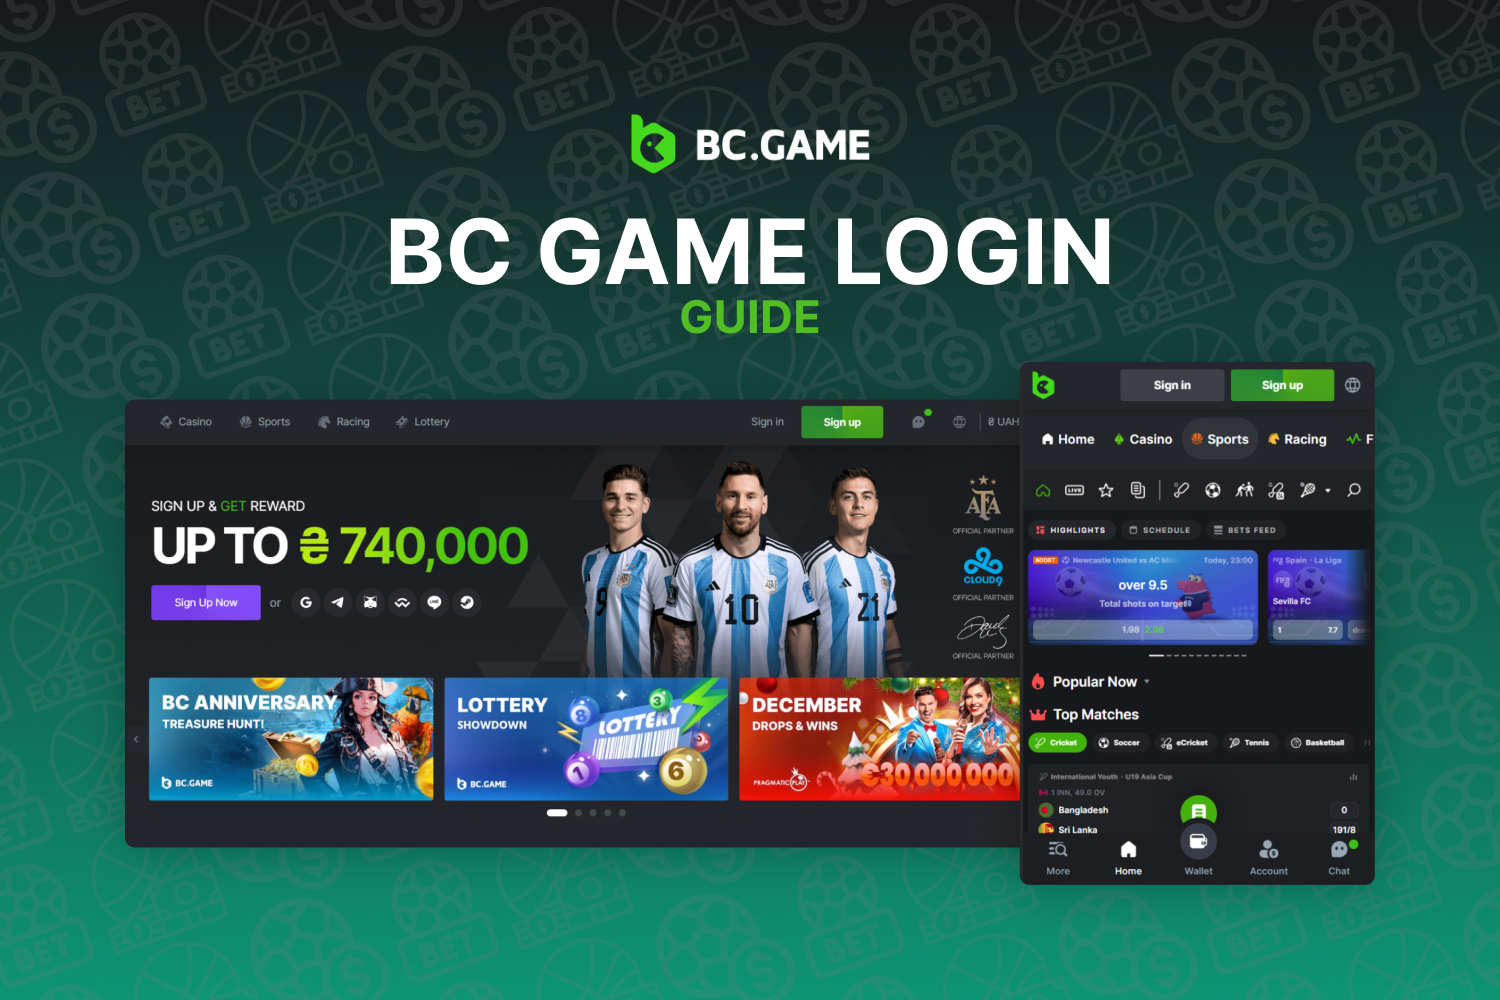 Are You Log in to B C Game The Right Way? These 5 Tips Will Help You Answer